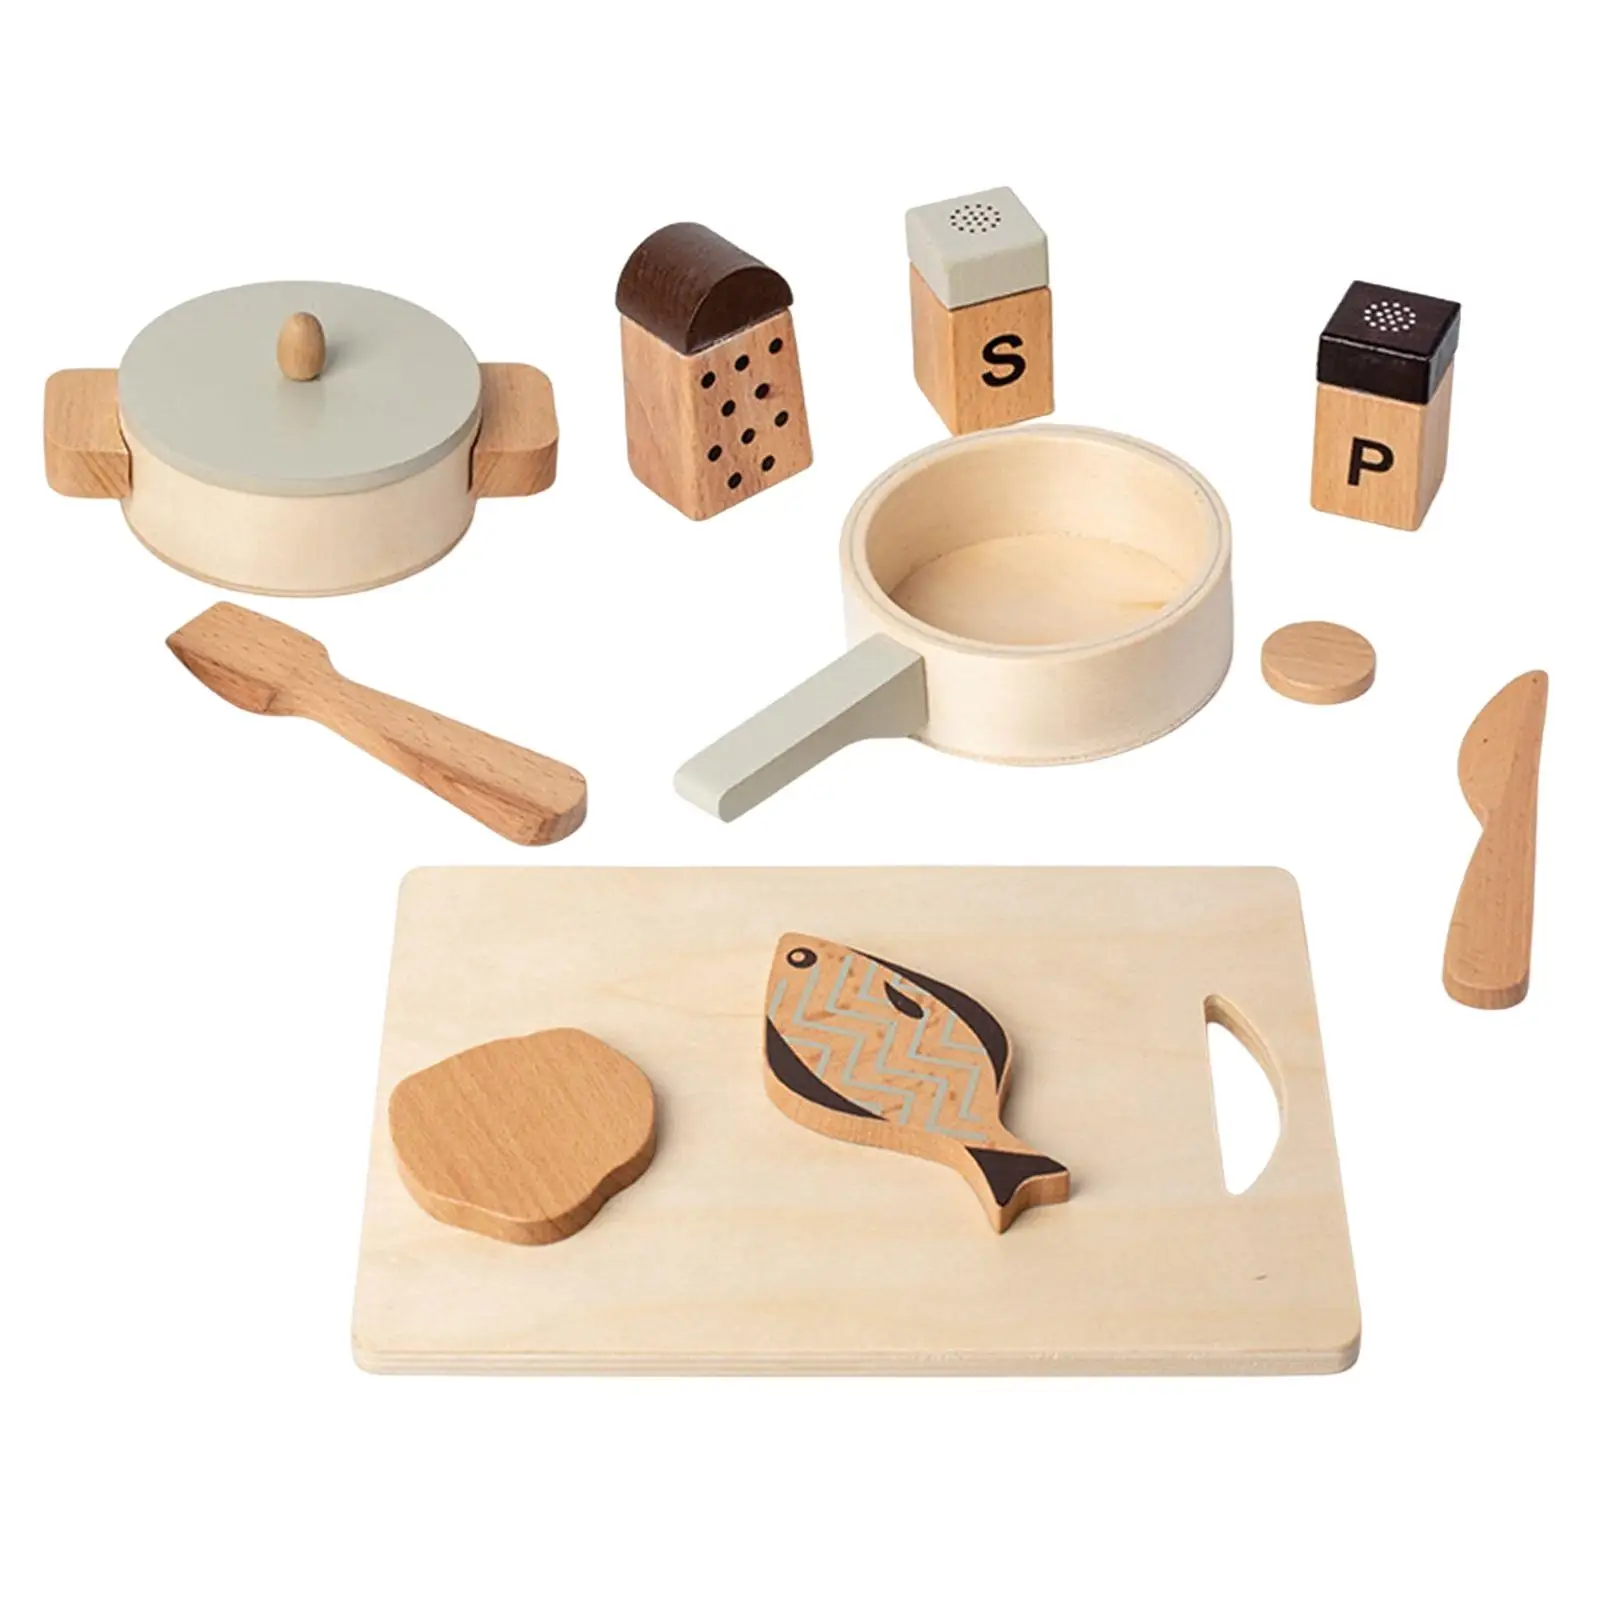 Wood Kitchen Playset, Pretend Toy, Pot Pan Chopping Board, Mini Kitchen Early Educational Cooking Cookware